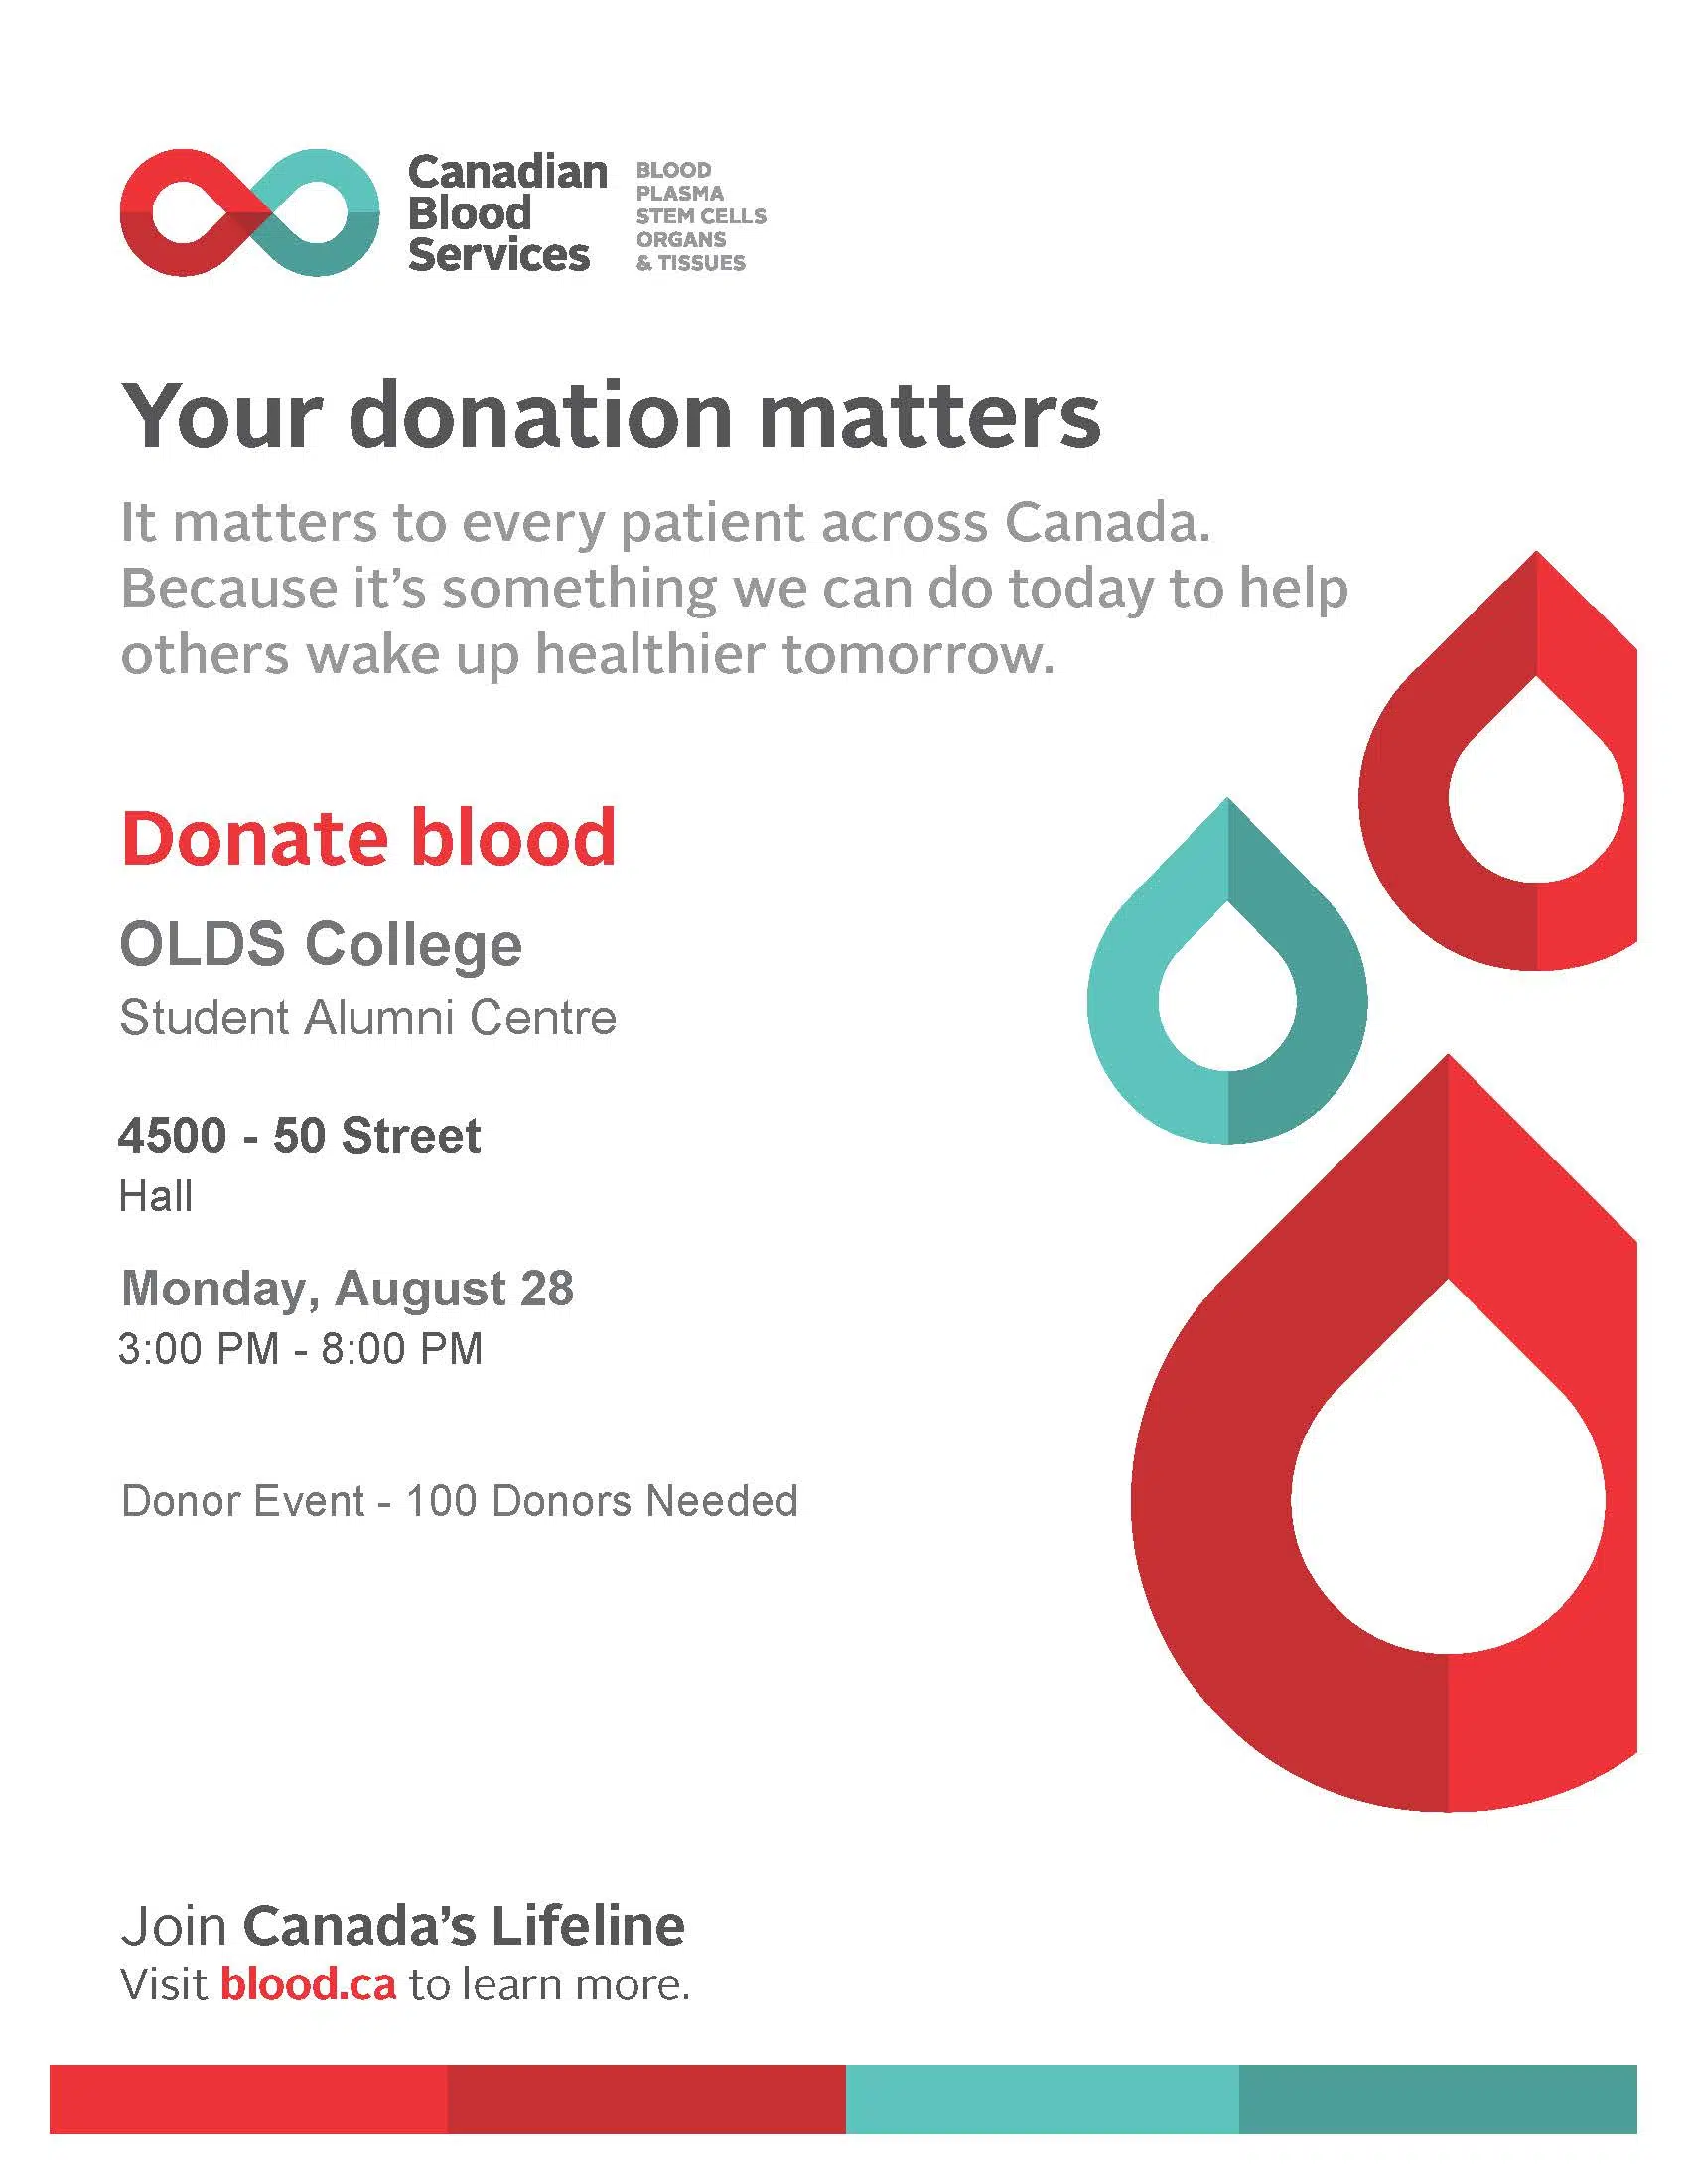 Blood Drive Set For August 28th At Olds College Alumni Centre, Already Booked Up